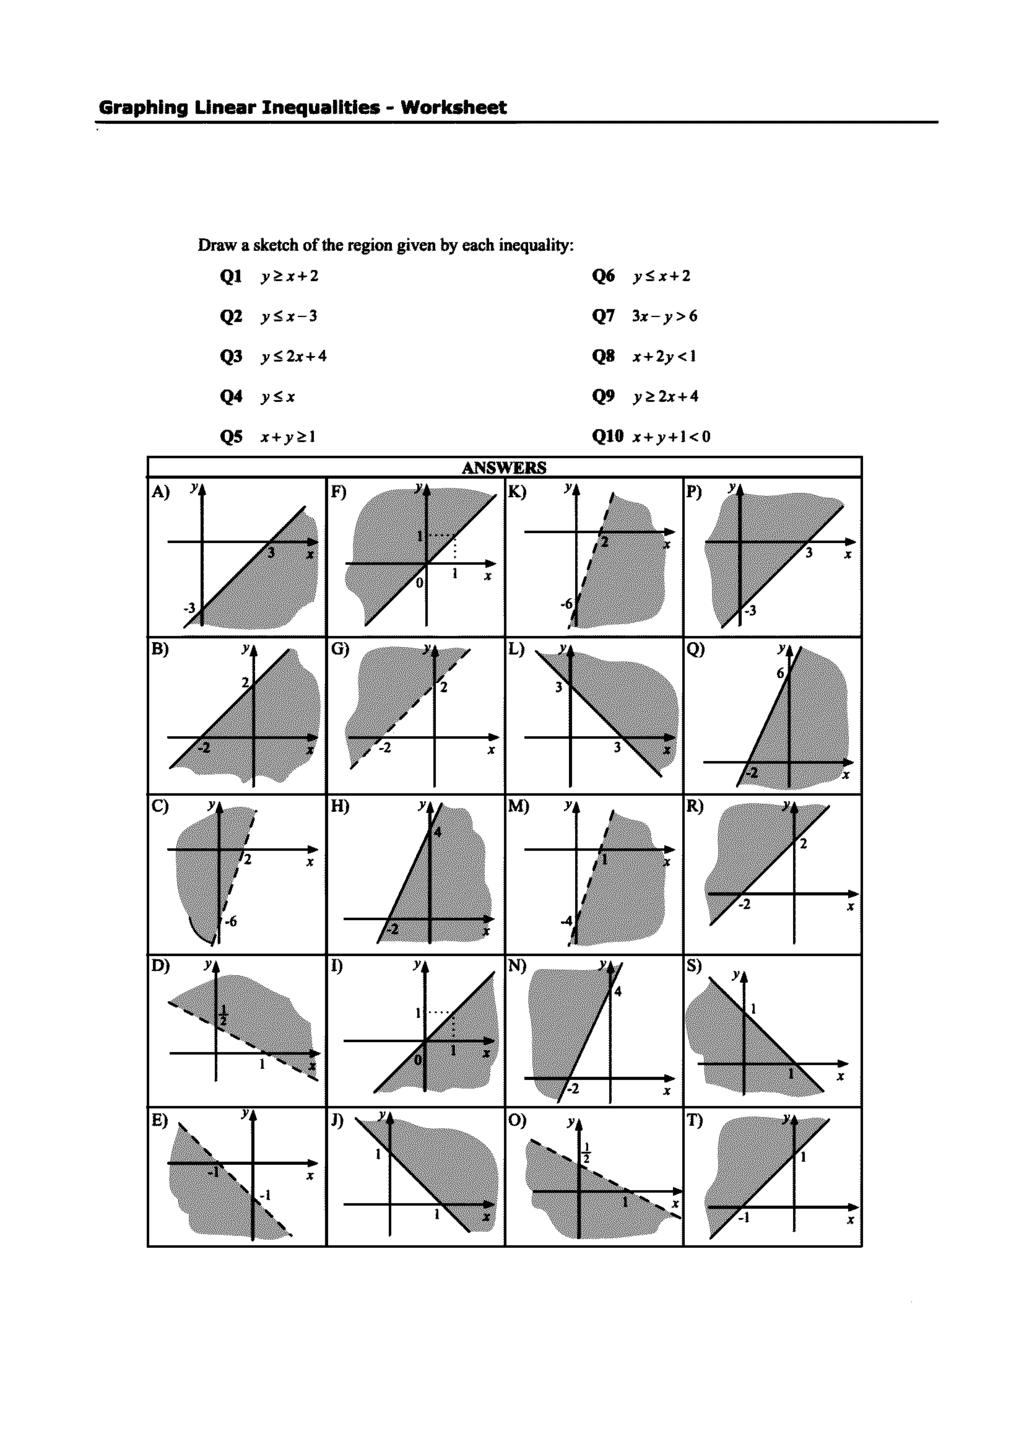 Set 9 Graphing Linear Inequalities - Worksheet Draw a sketch of the region given by each inequality: Q1 y?